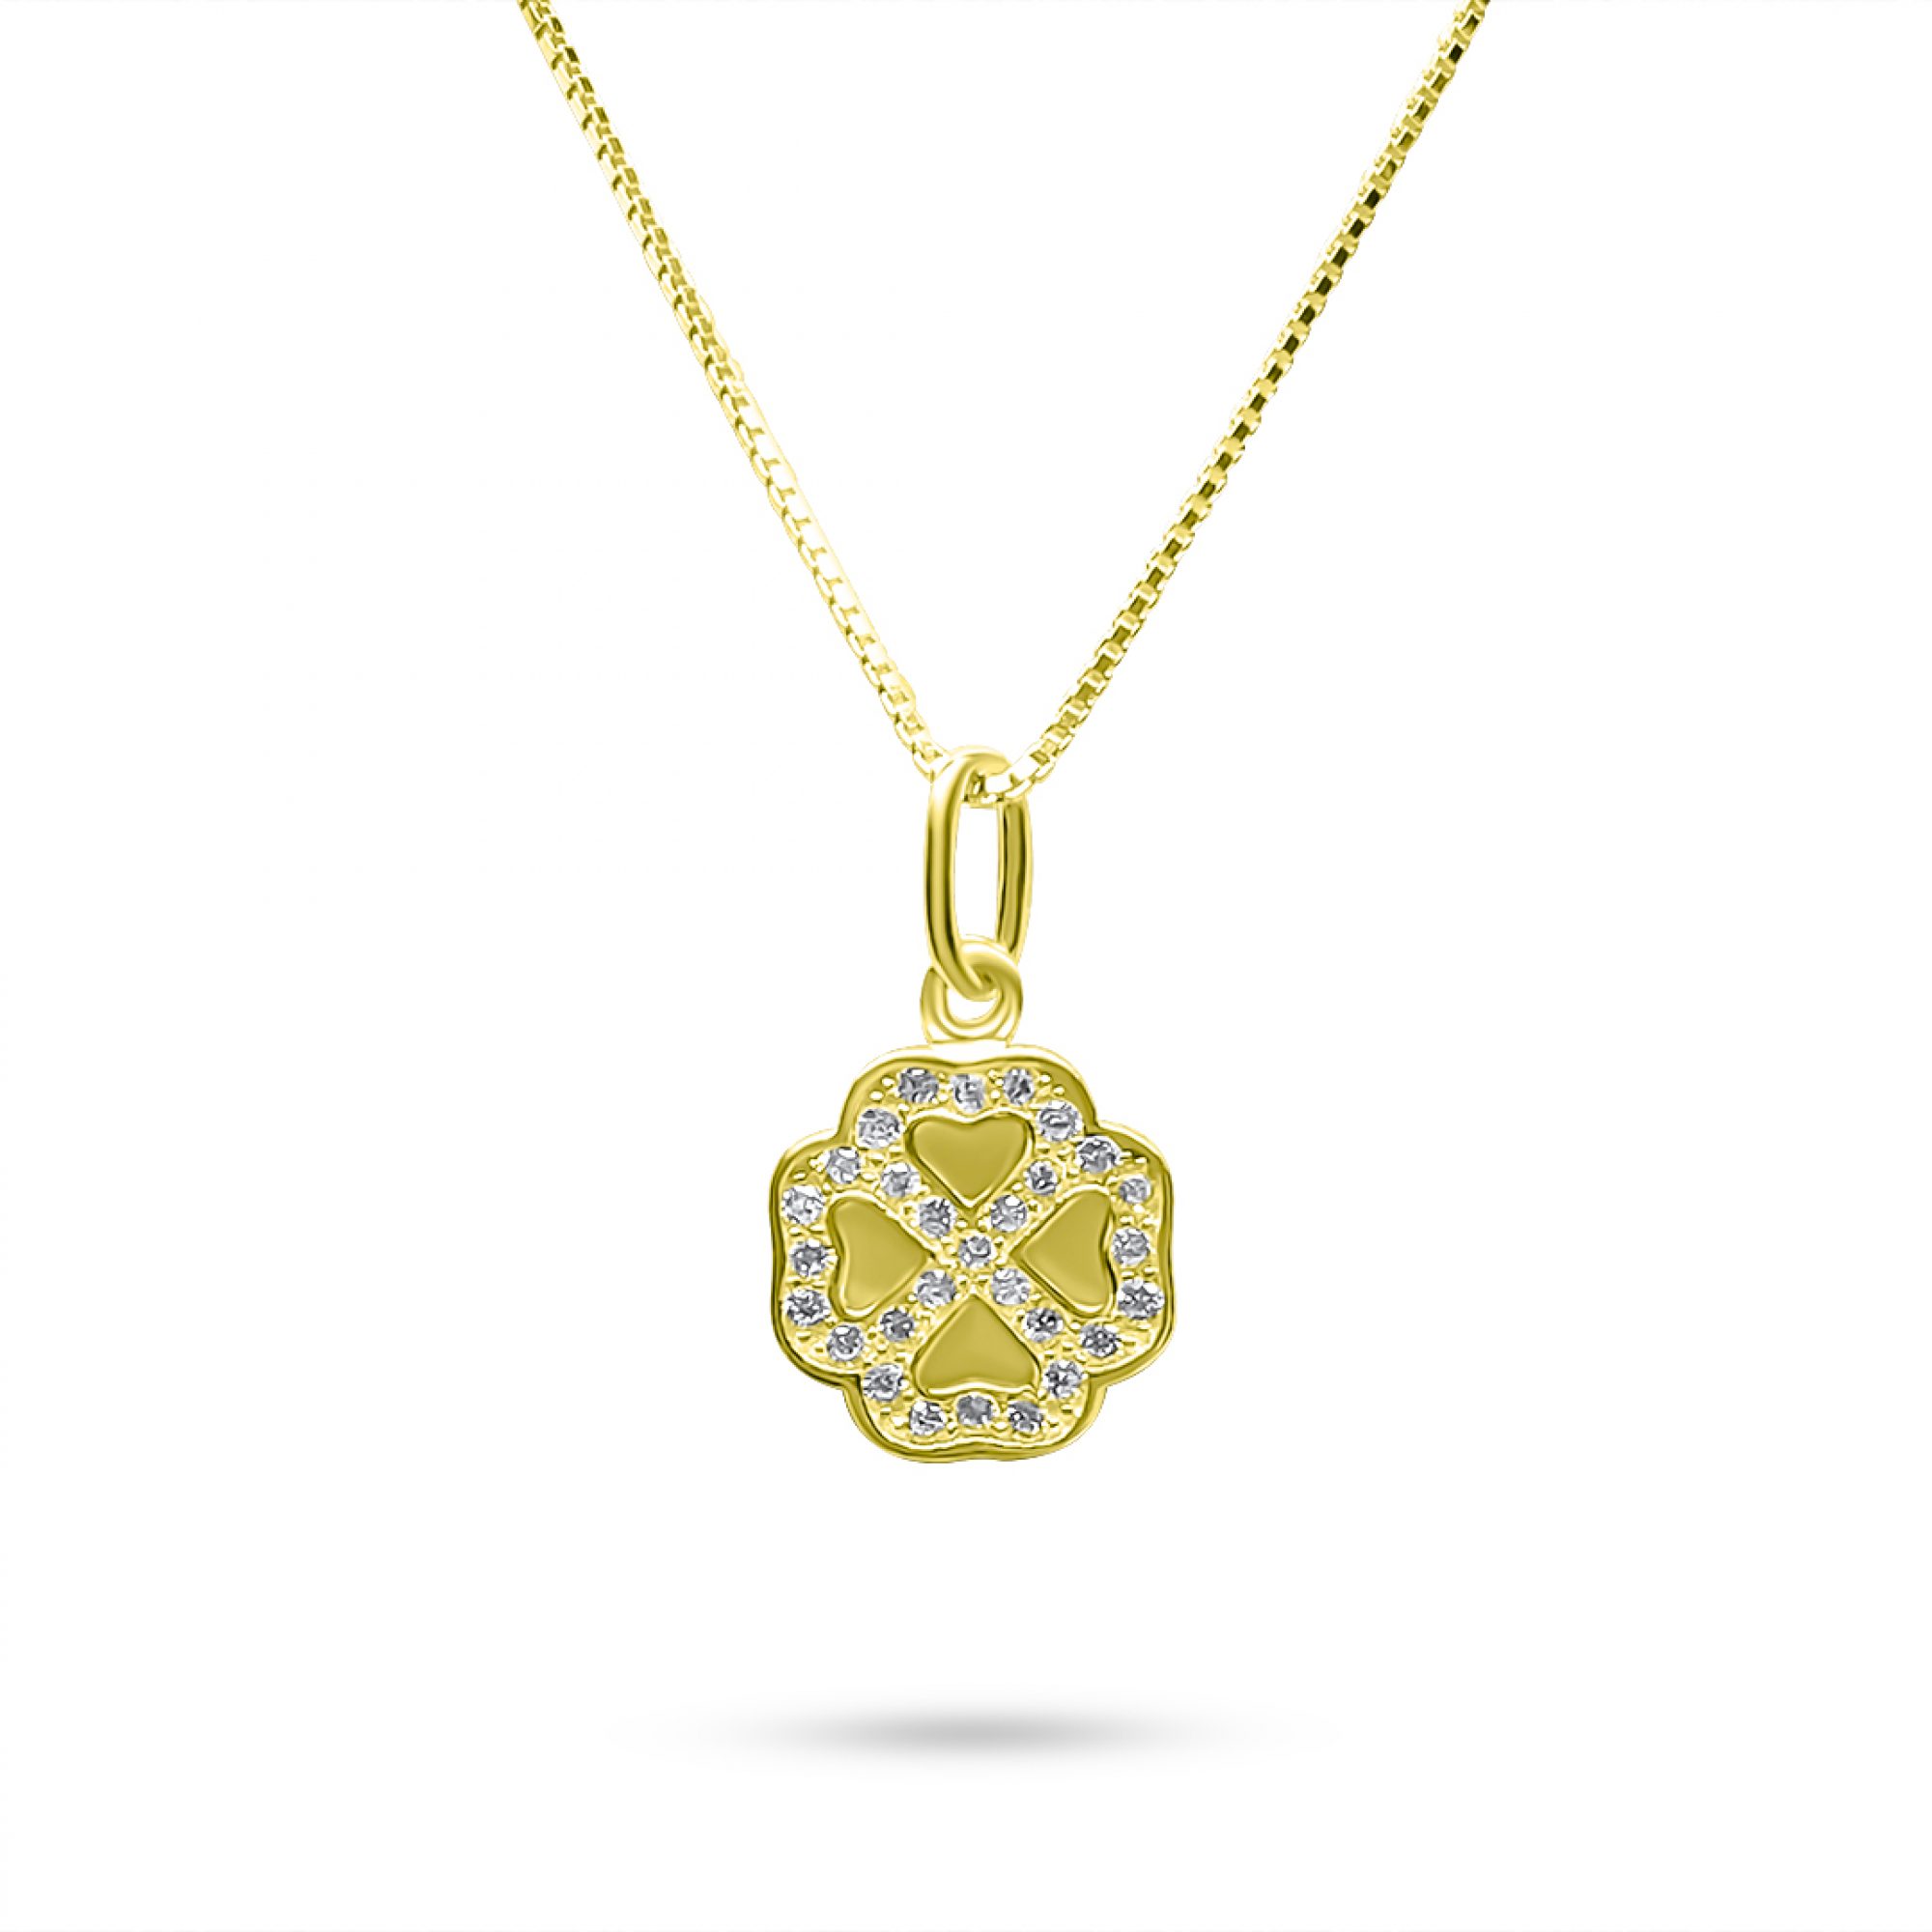 Gold plated four leaf pendant with zircon stones